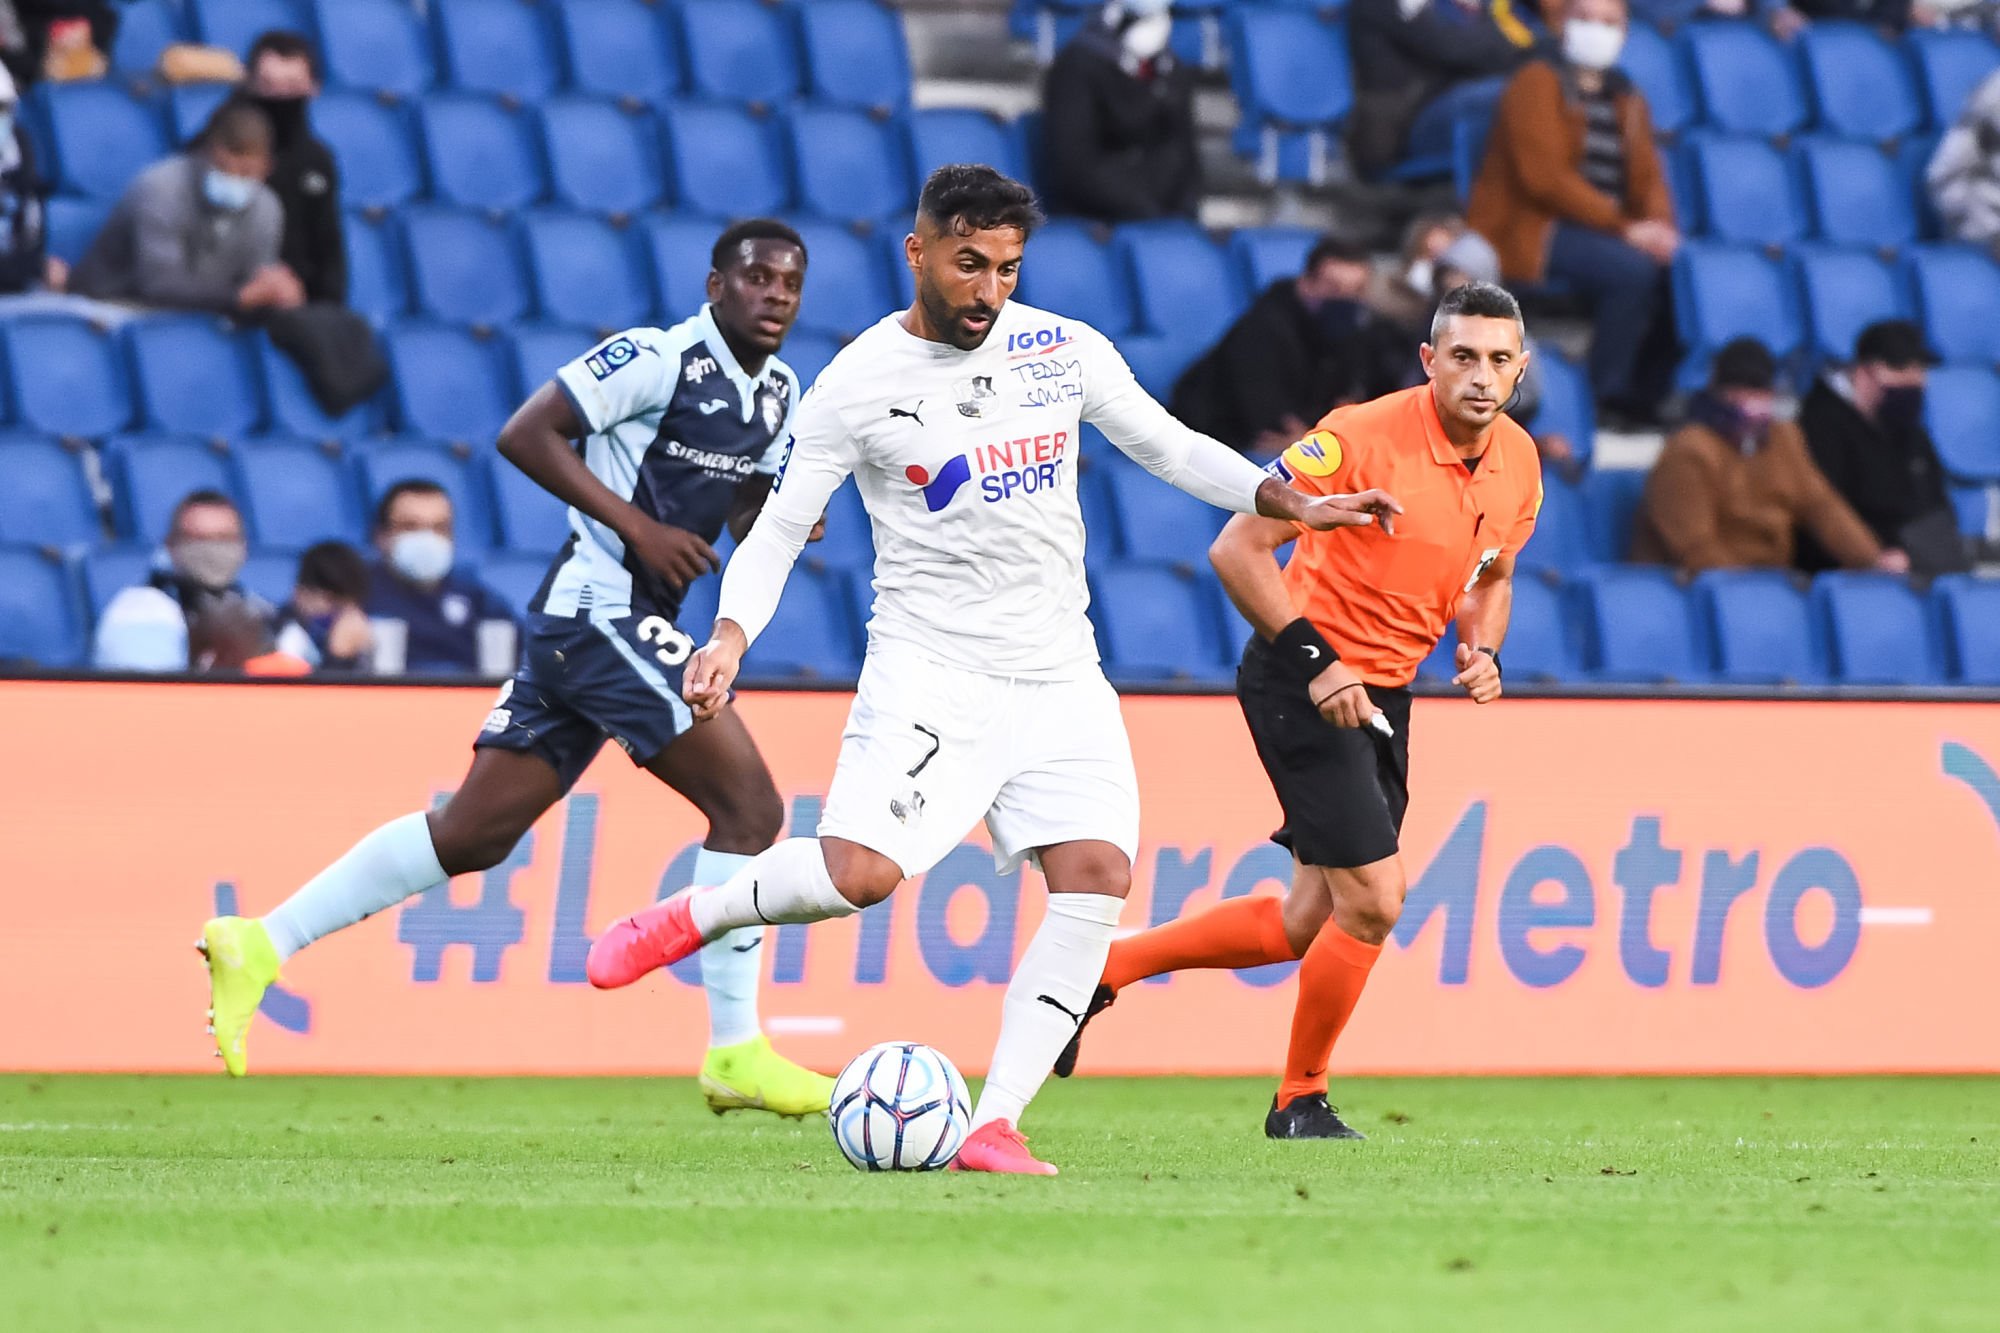 Saman GHODDOS of Amiens during the French Ligue 1 soccer match between Le Havre AC and Amiens SC, at Oceane Stadium, Le Havre, France on 29th August 2020. (Photo by Baptiste Fernandez/Icon Sport) - Saman GHODDOS - Stade Oceane - Le Havre (France)